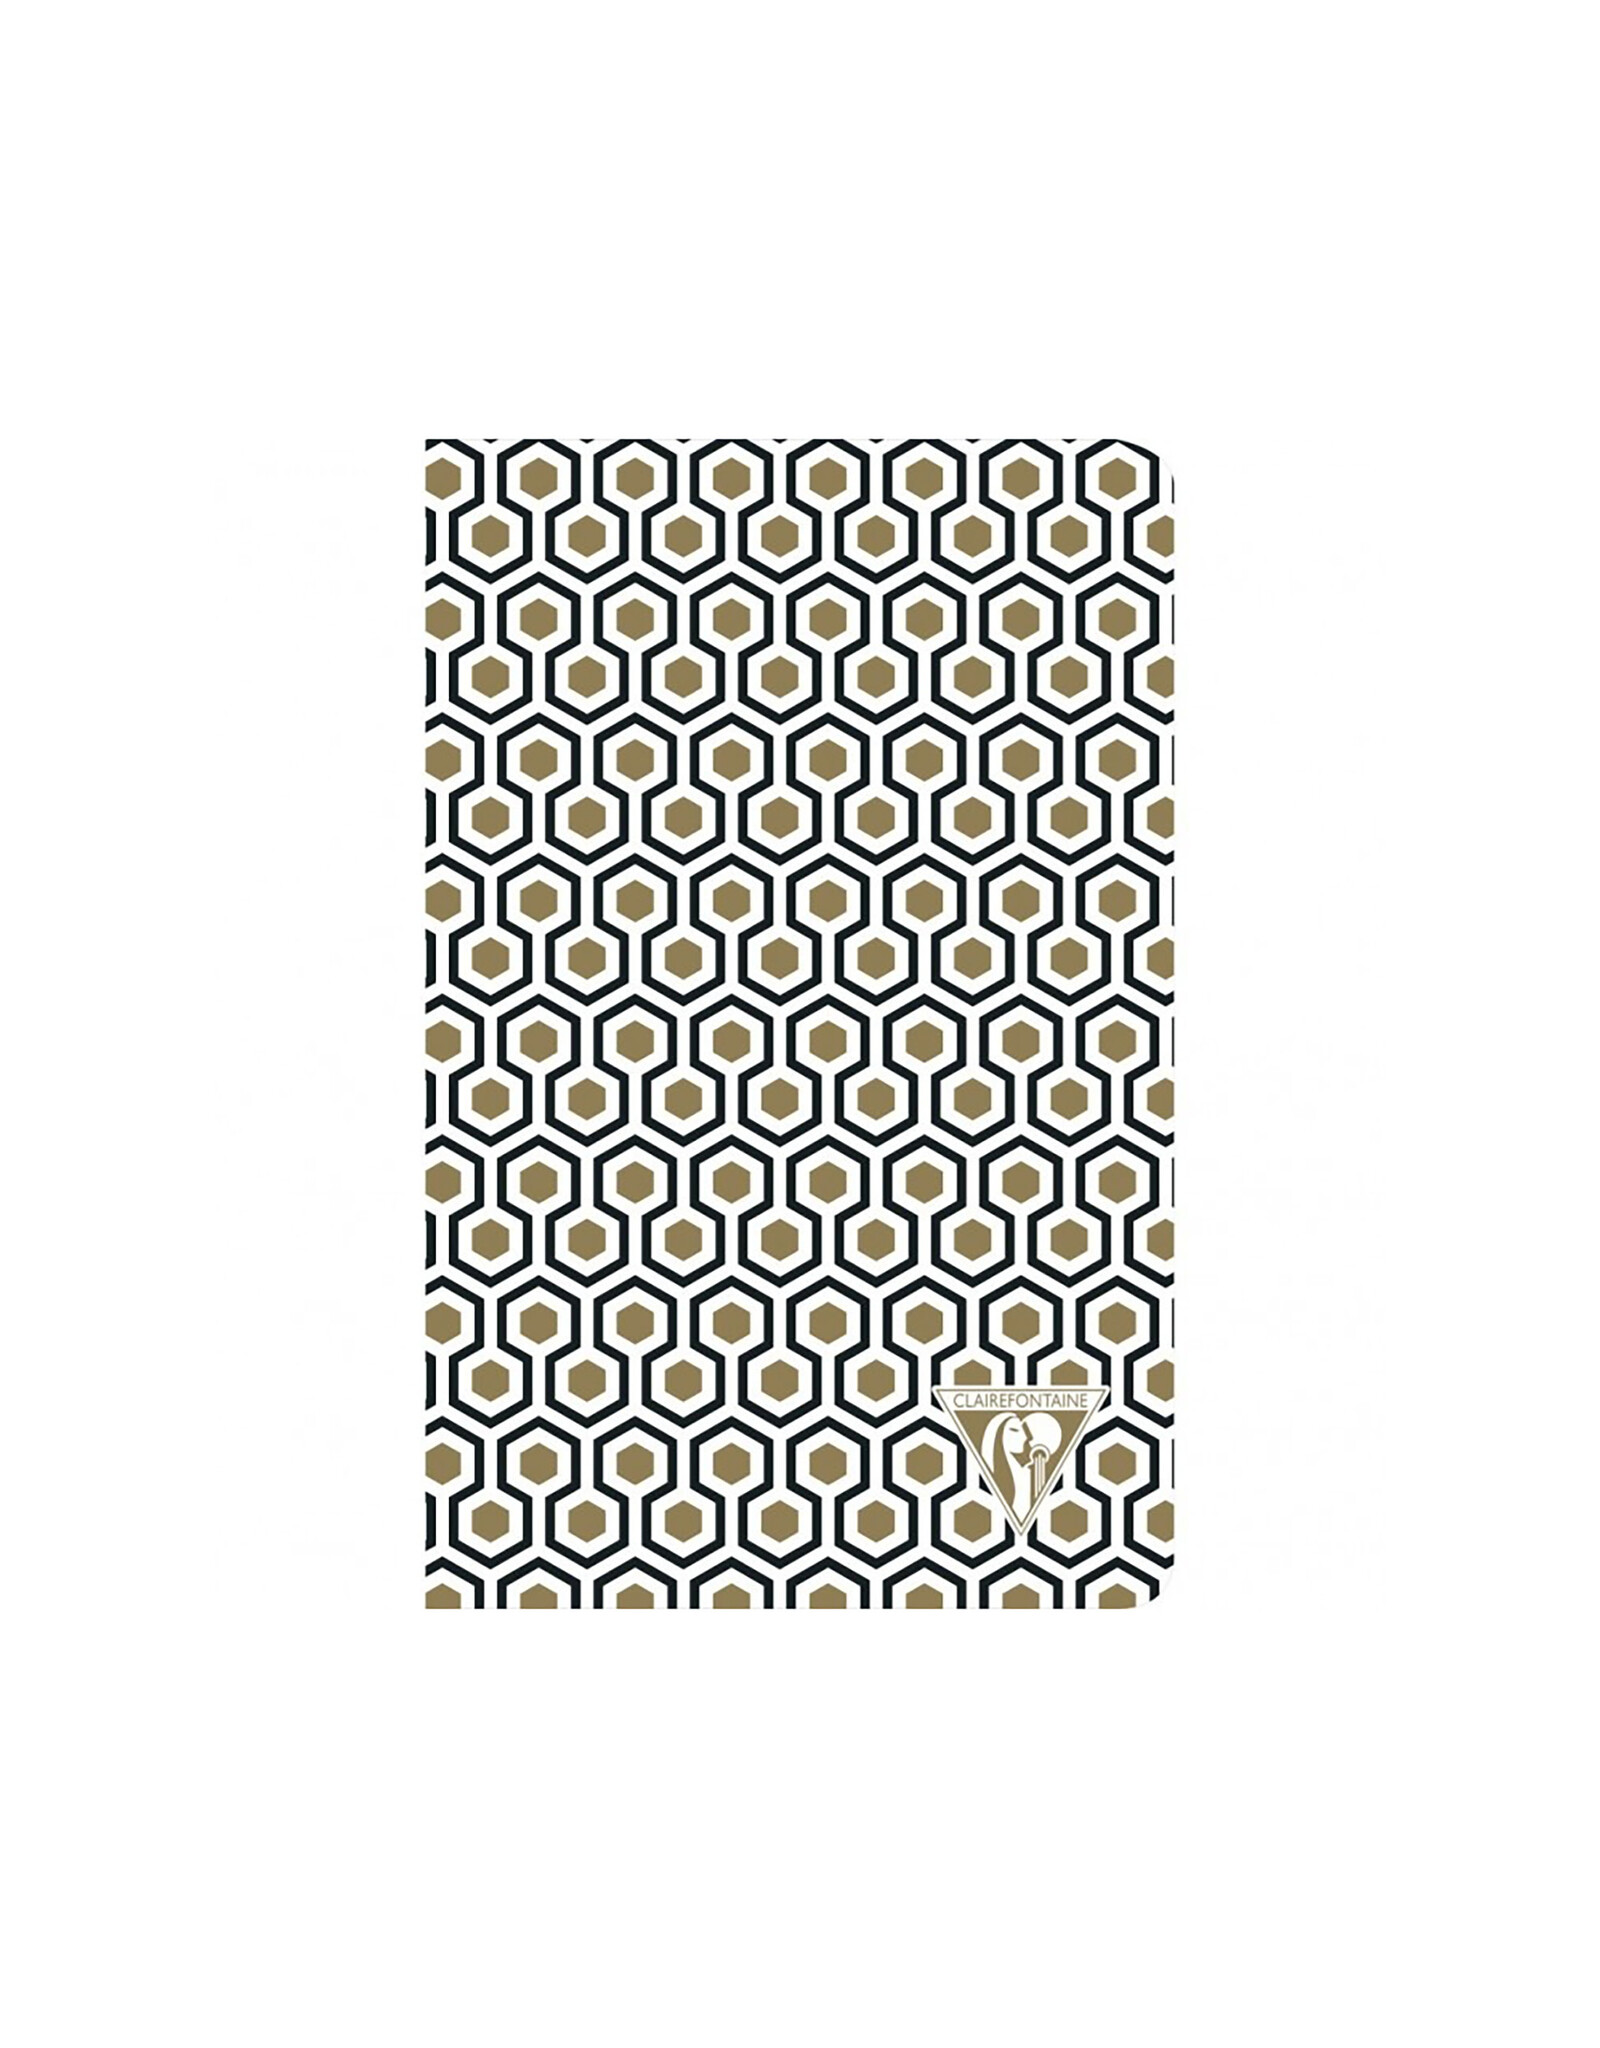 Clairefontaine Honeycomb Pattern Gold & Black Neo Deco Lined A5 Notebook